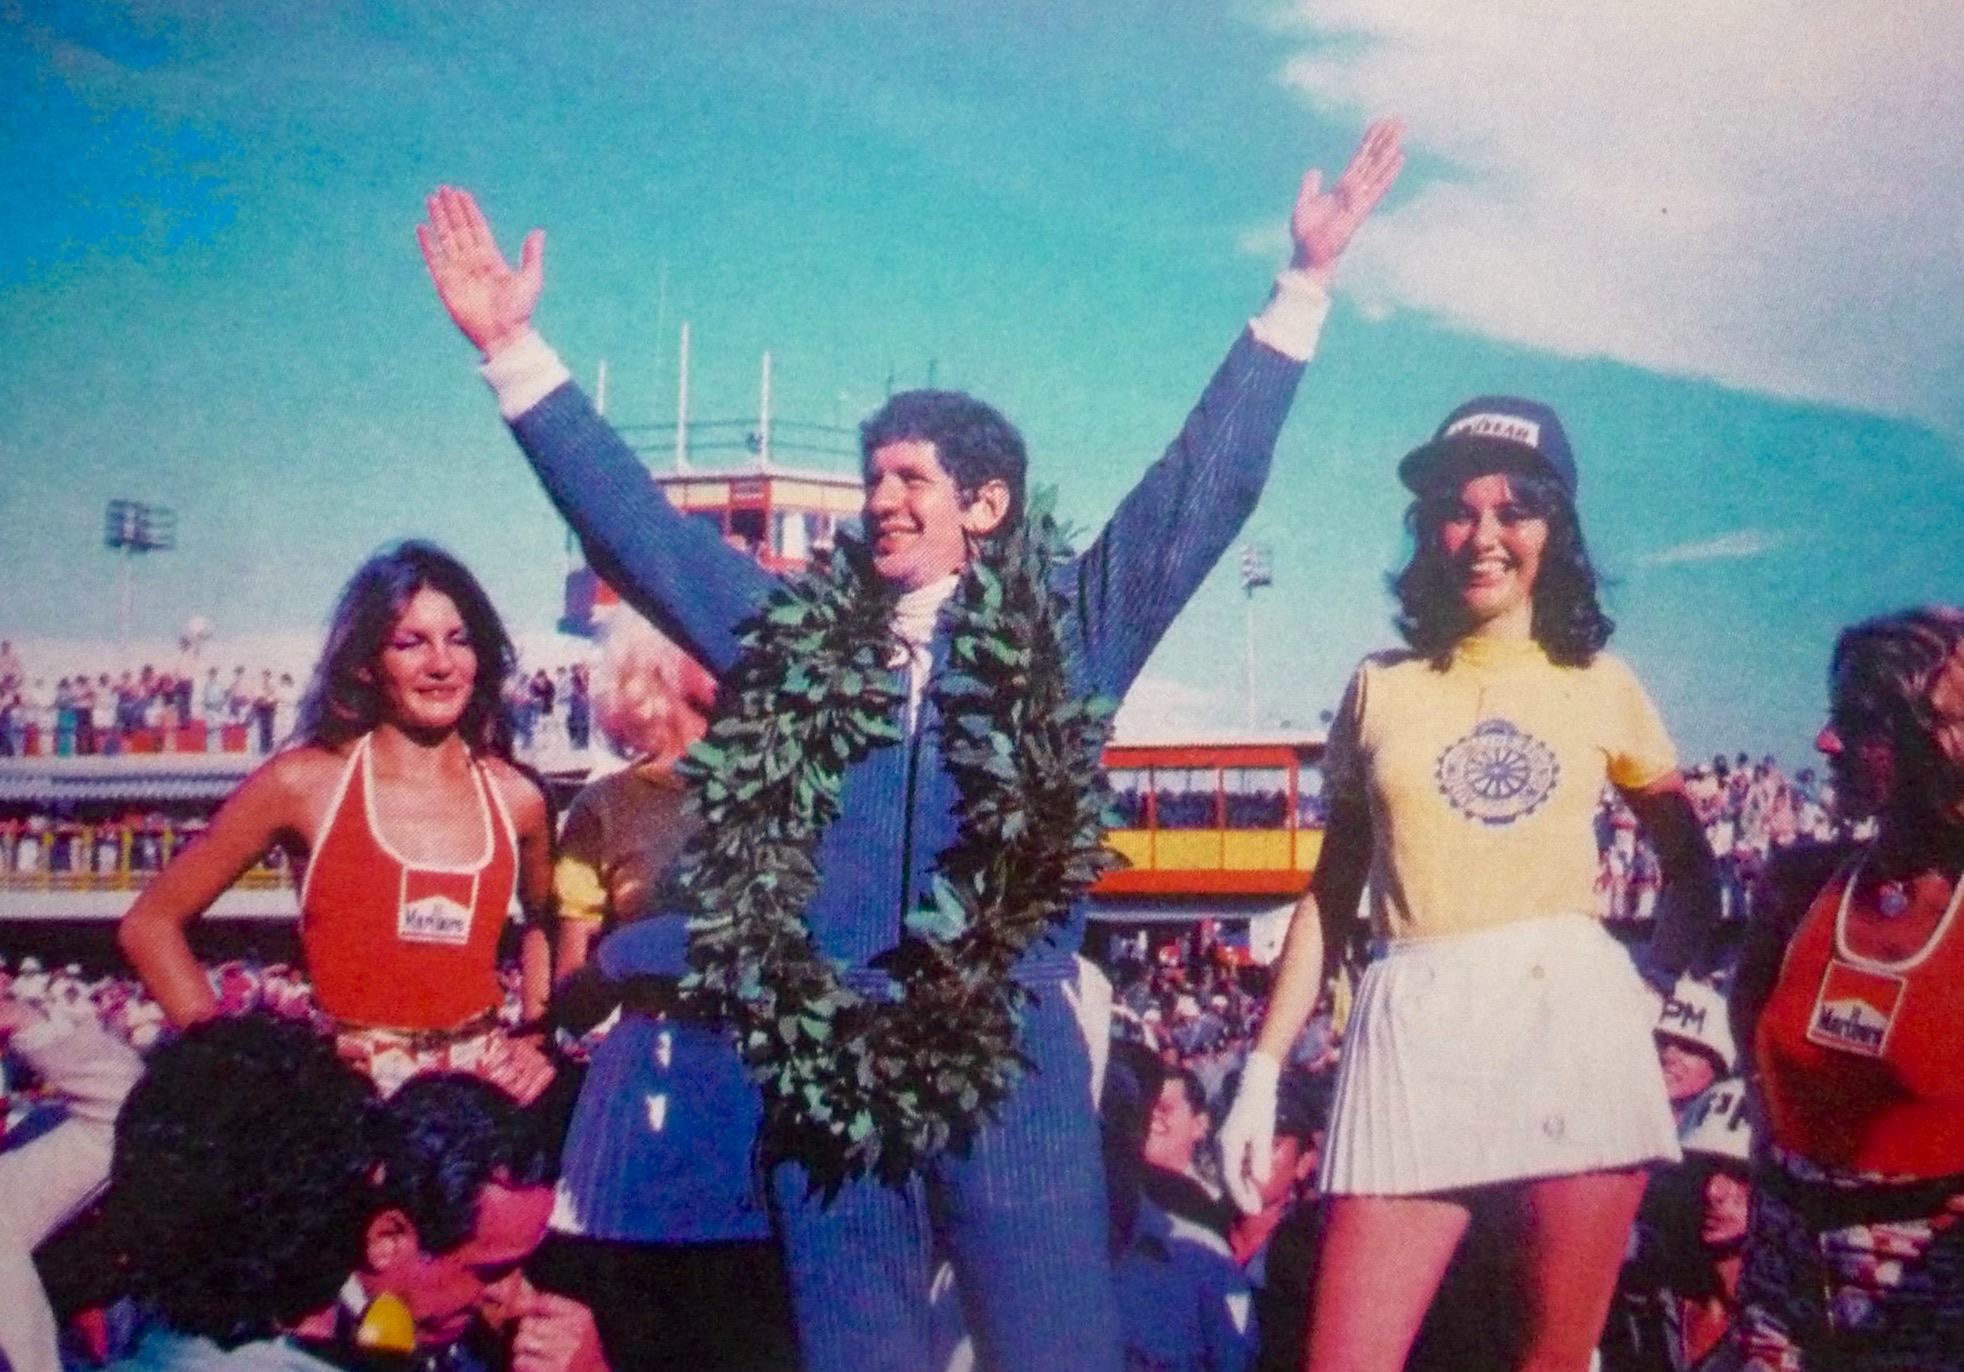 Jody Scheckter, Wolf WR1, on the podium with three girls at the Argentinean Grand Prix on 09 January 1977.